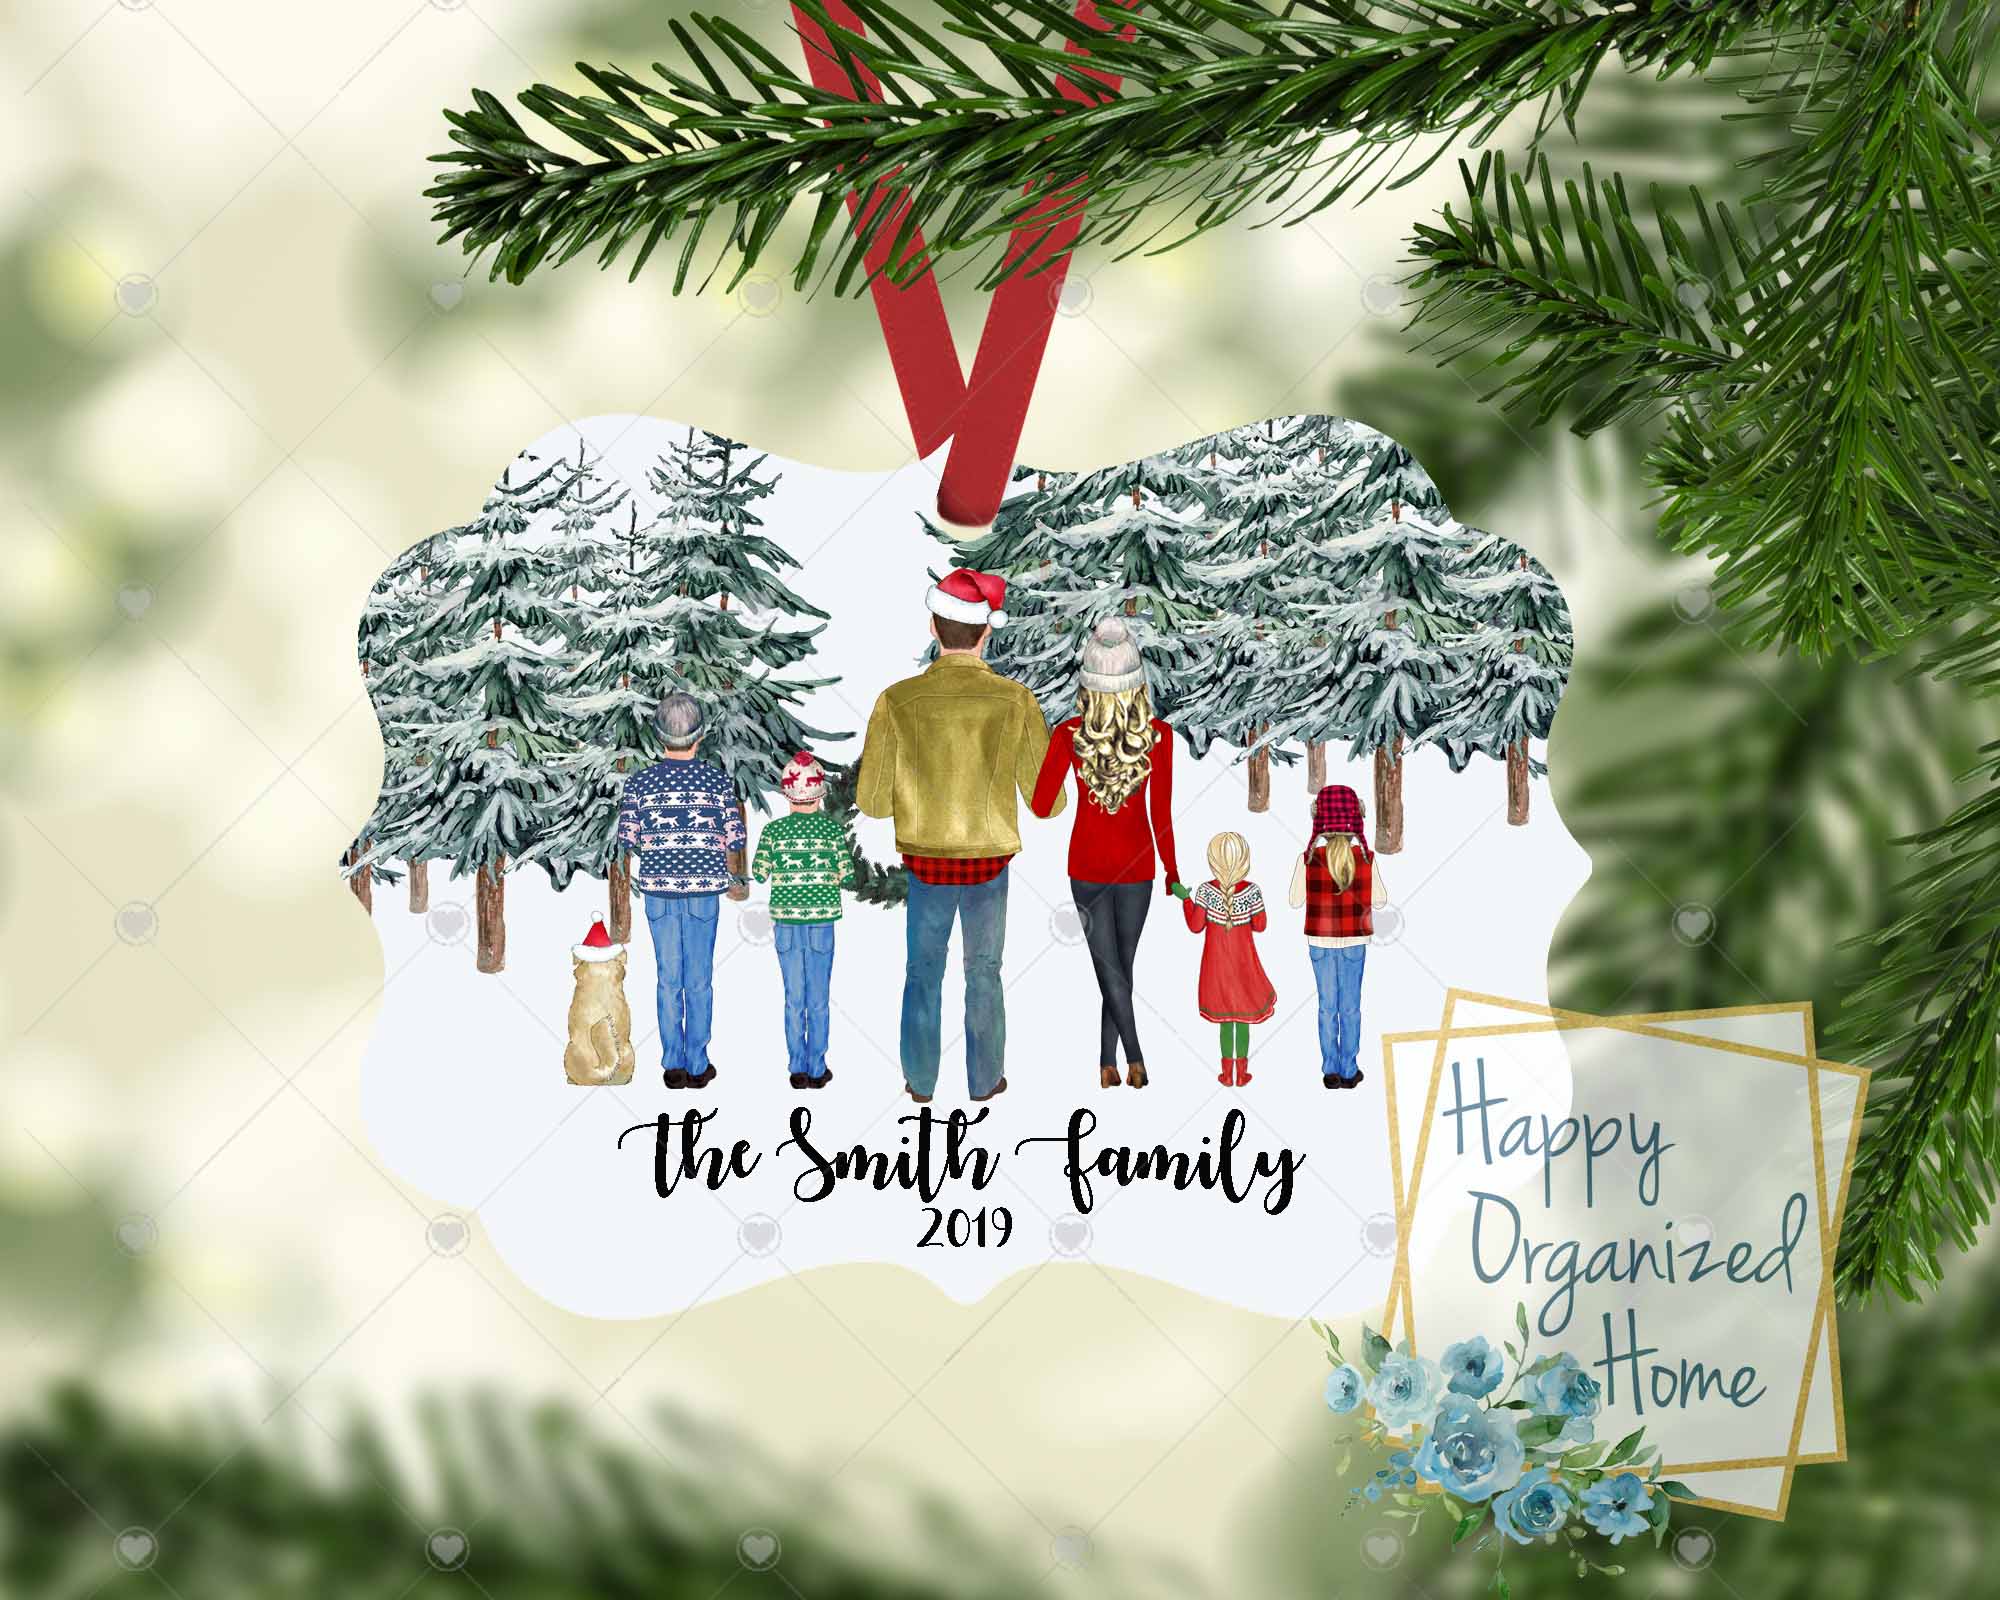 Christmas Family ornament - Personalized and includes pets